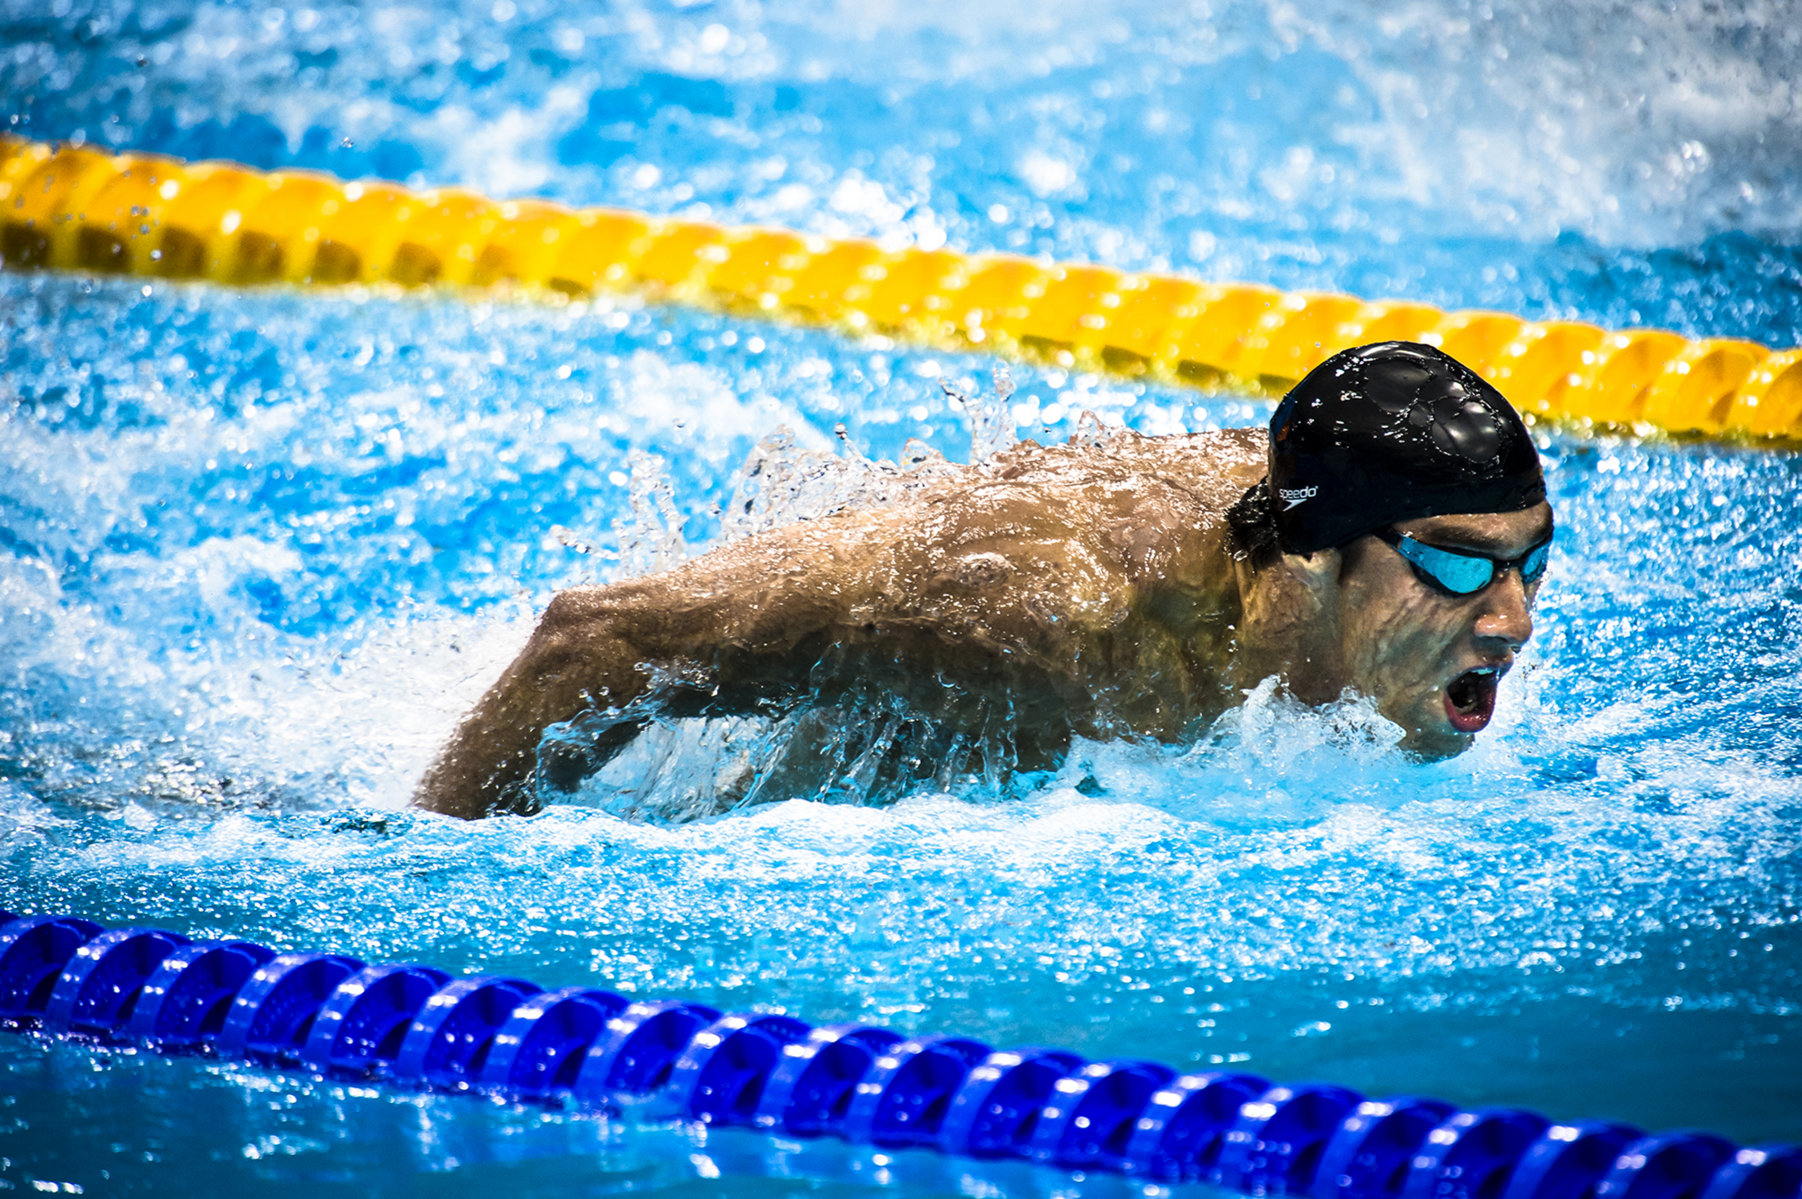 Michael Phelps, Competing in the 200 meter Butterfly at the London Olympics. : Olympics : Photography by Adam Stoltman: Sports Photography, The Arts, Portraiture, Travel, Photojournalism and Fine Art in New York